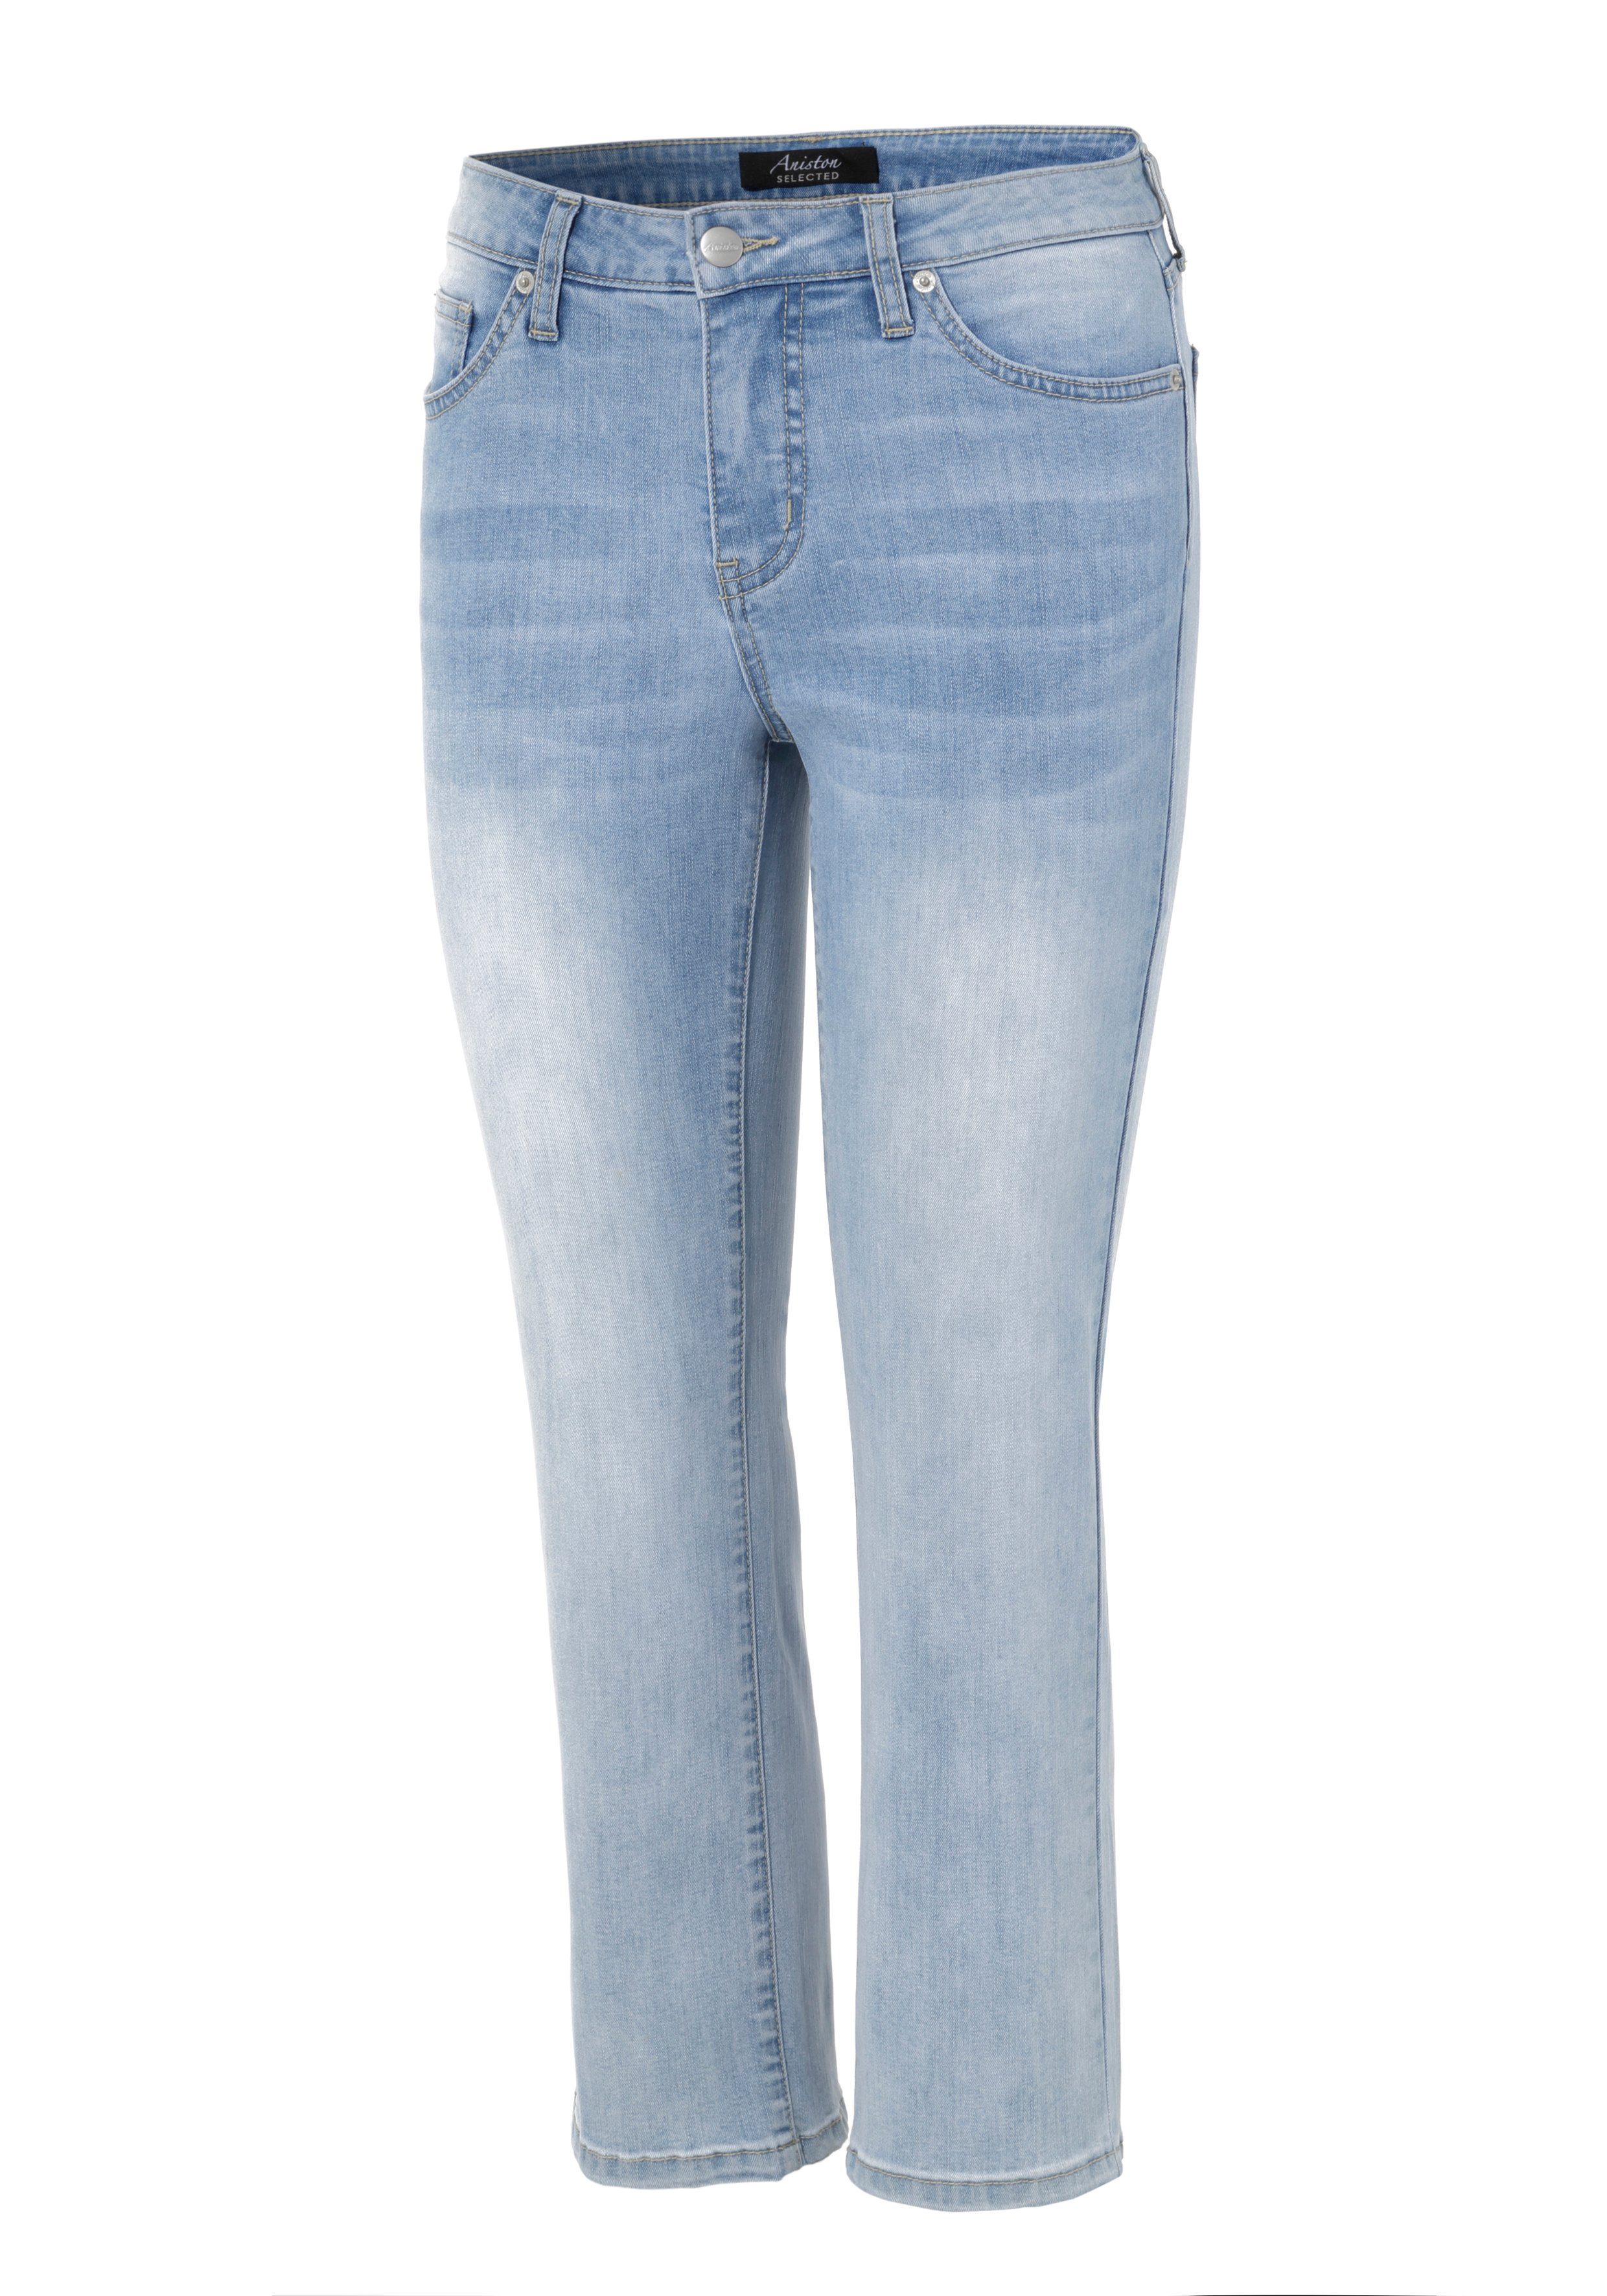 verkürzter cropped Aniston Länge light-blue-washed SELECTED Straight-Jeans in